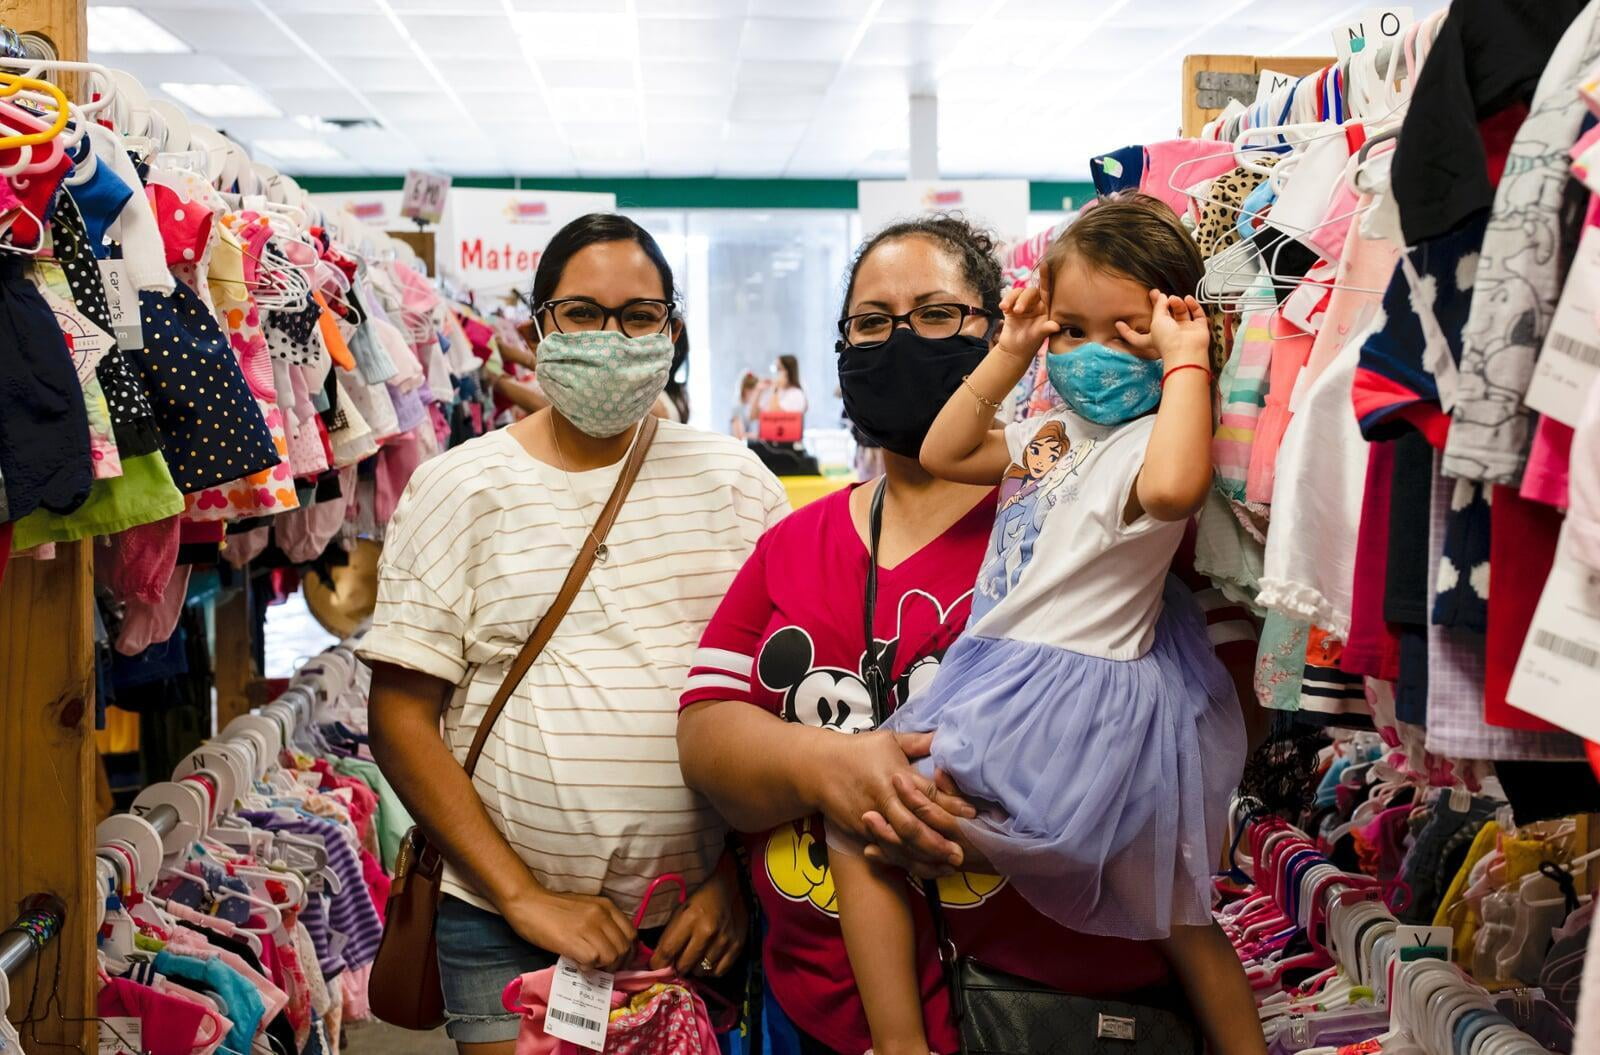 Two face masked moms—one holding a child with a mask, the other pregnant—shop for their families at the local JBF sale.